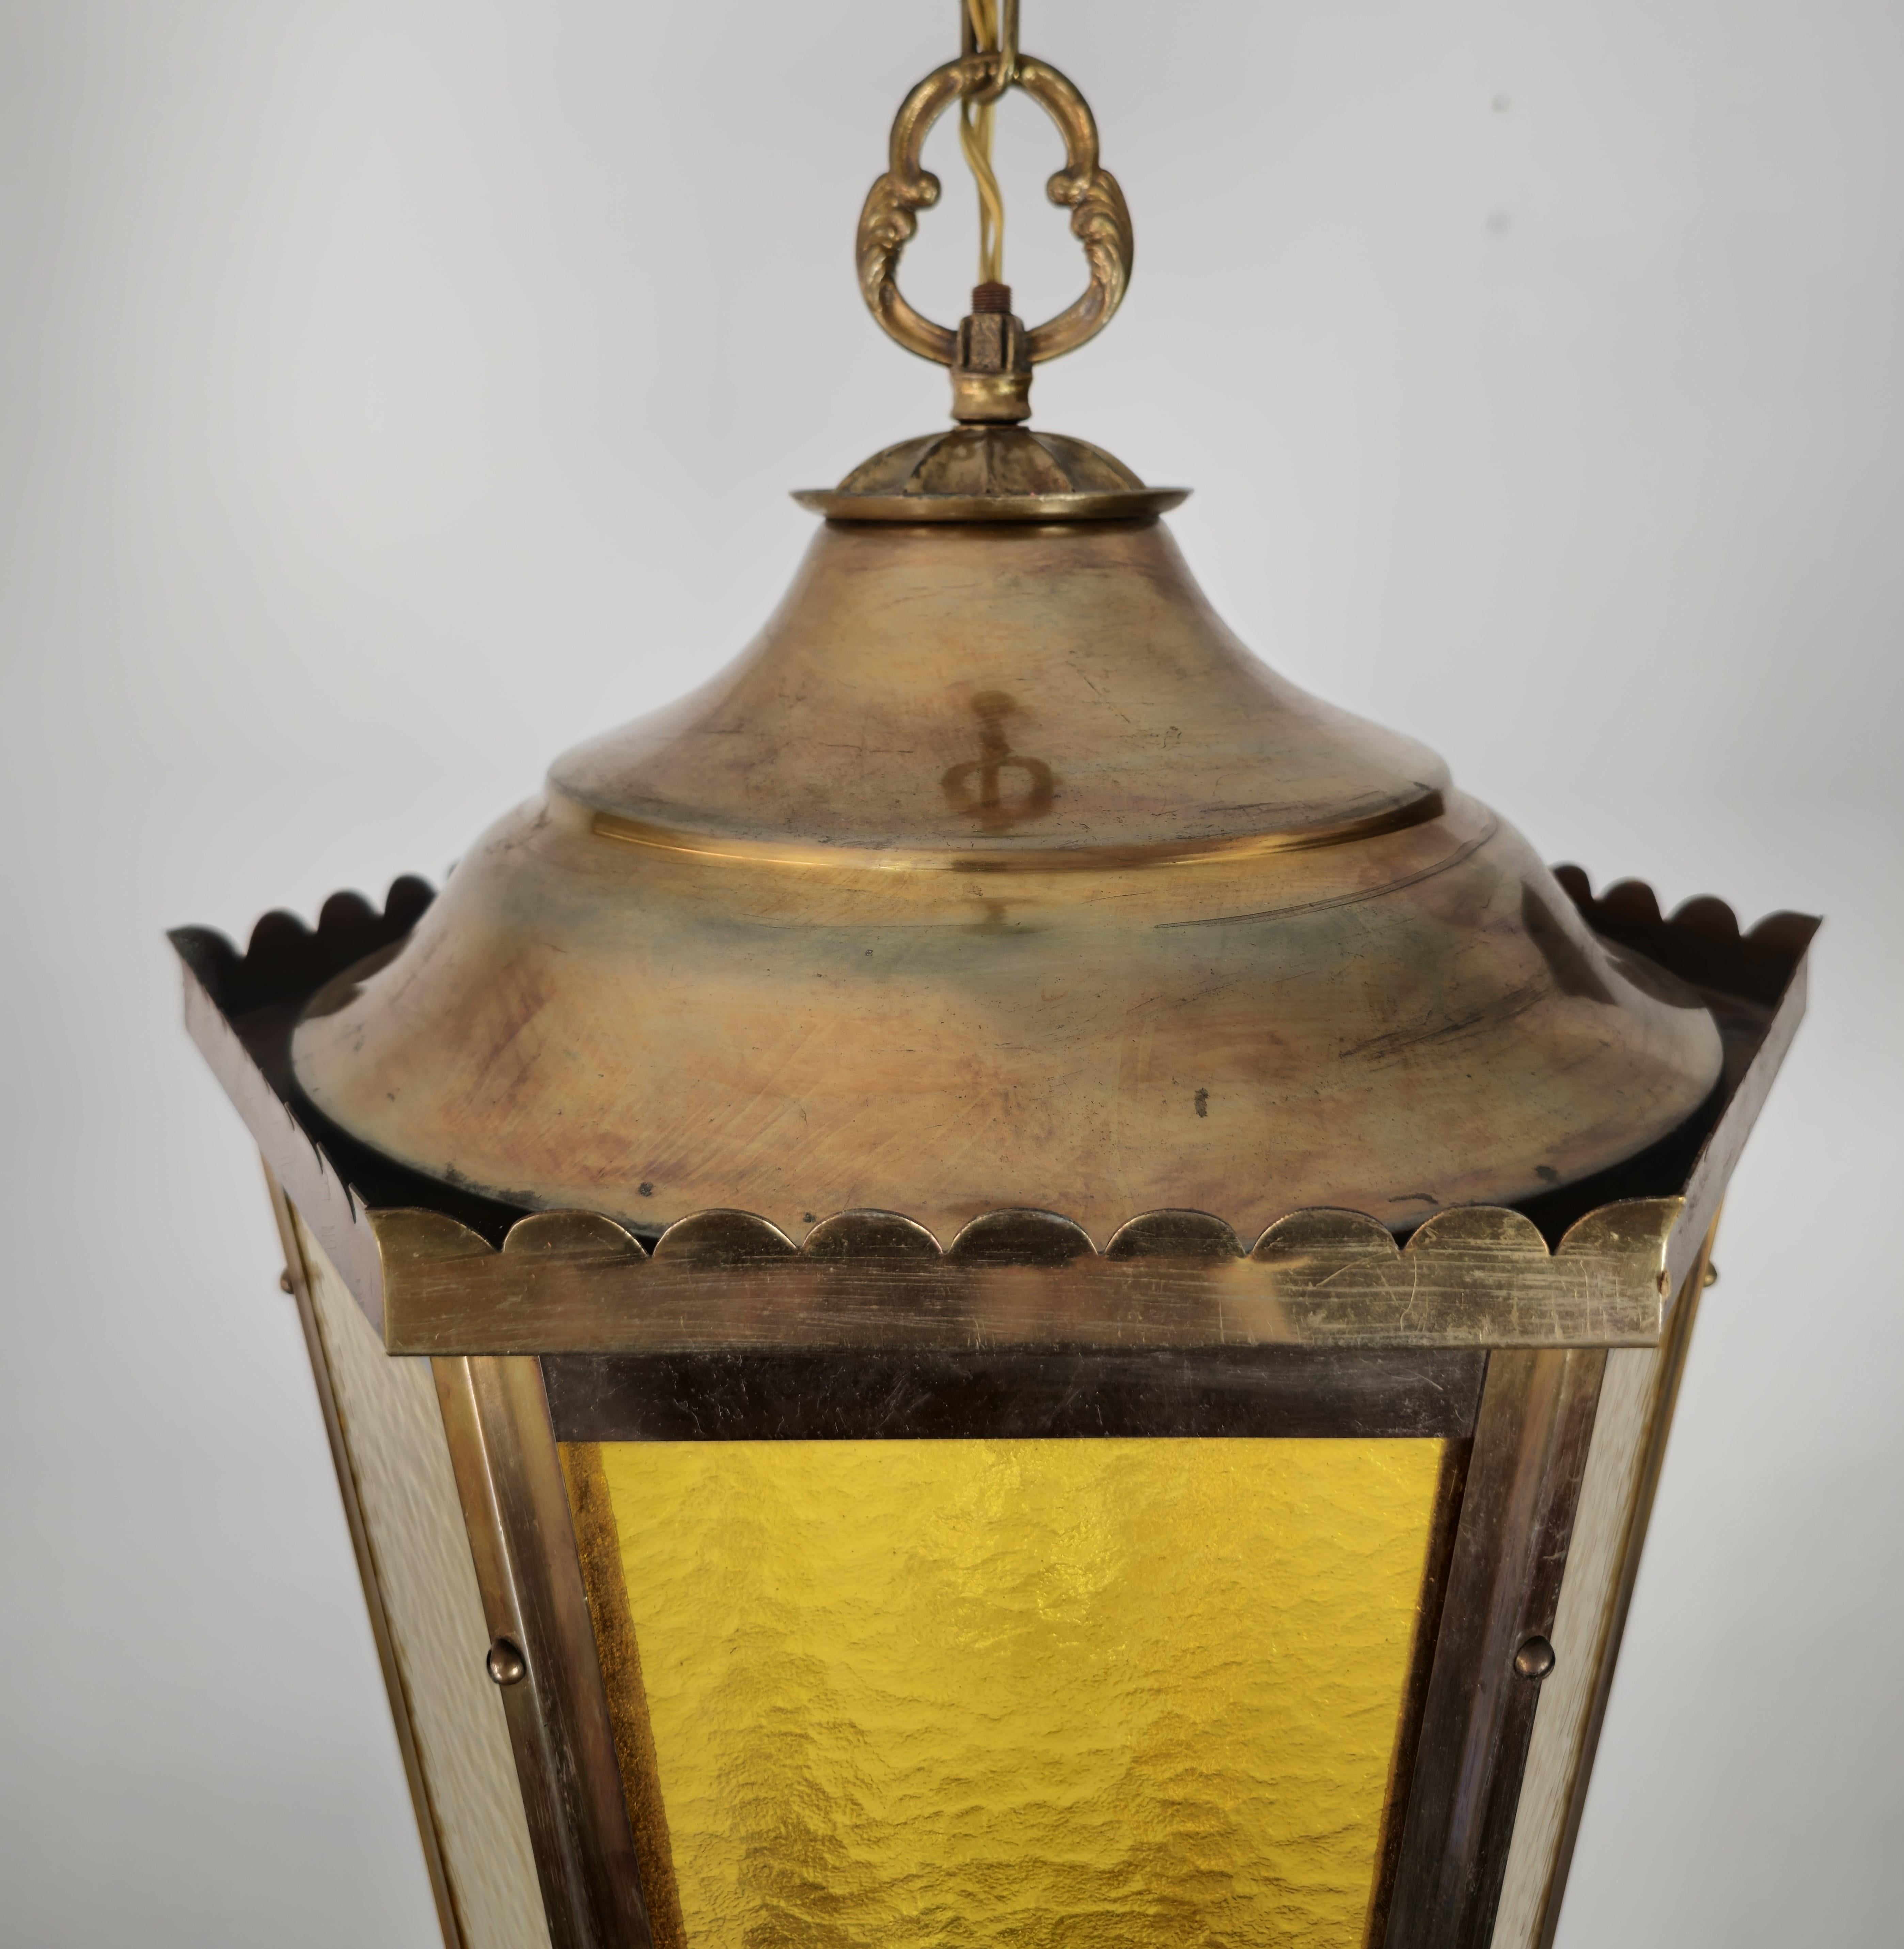  Pendant Lantern Suspension Lamp Brass Glass Cathedral Midcentury Italy 1940s For Sale 1